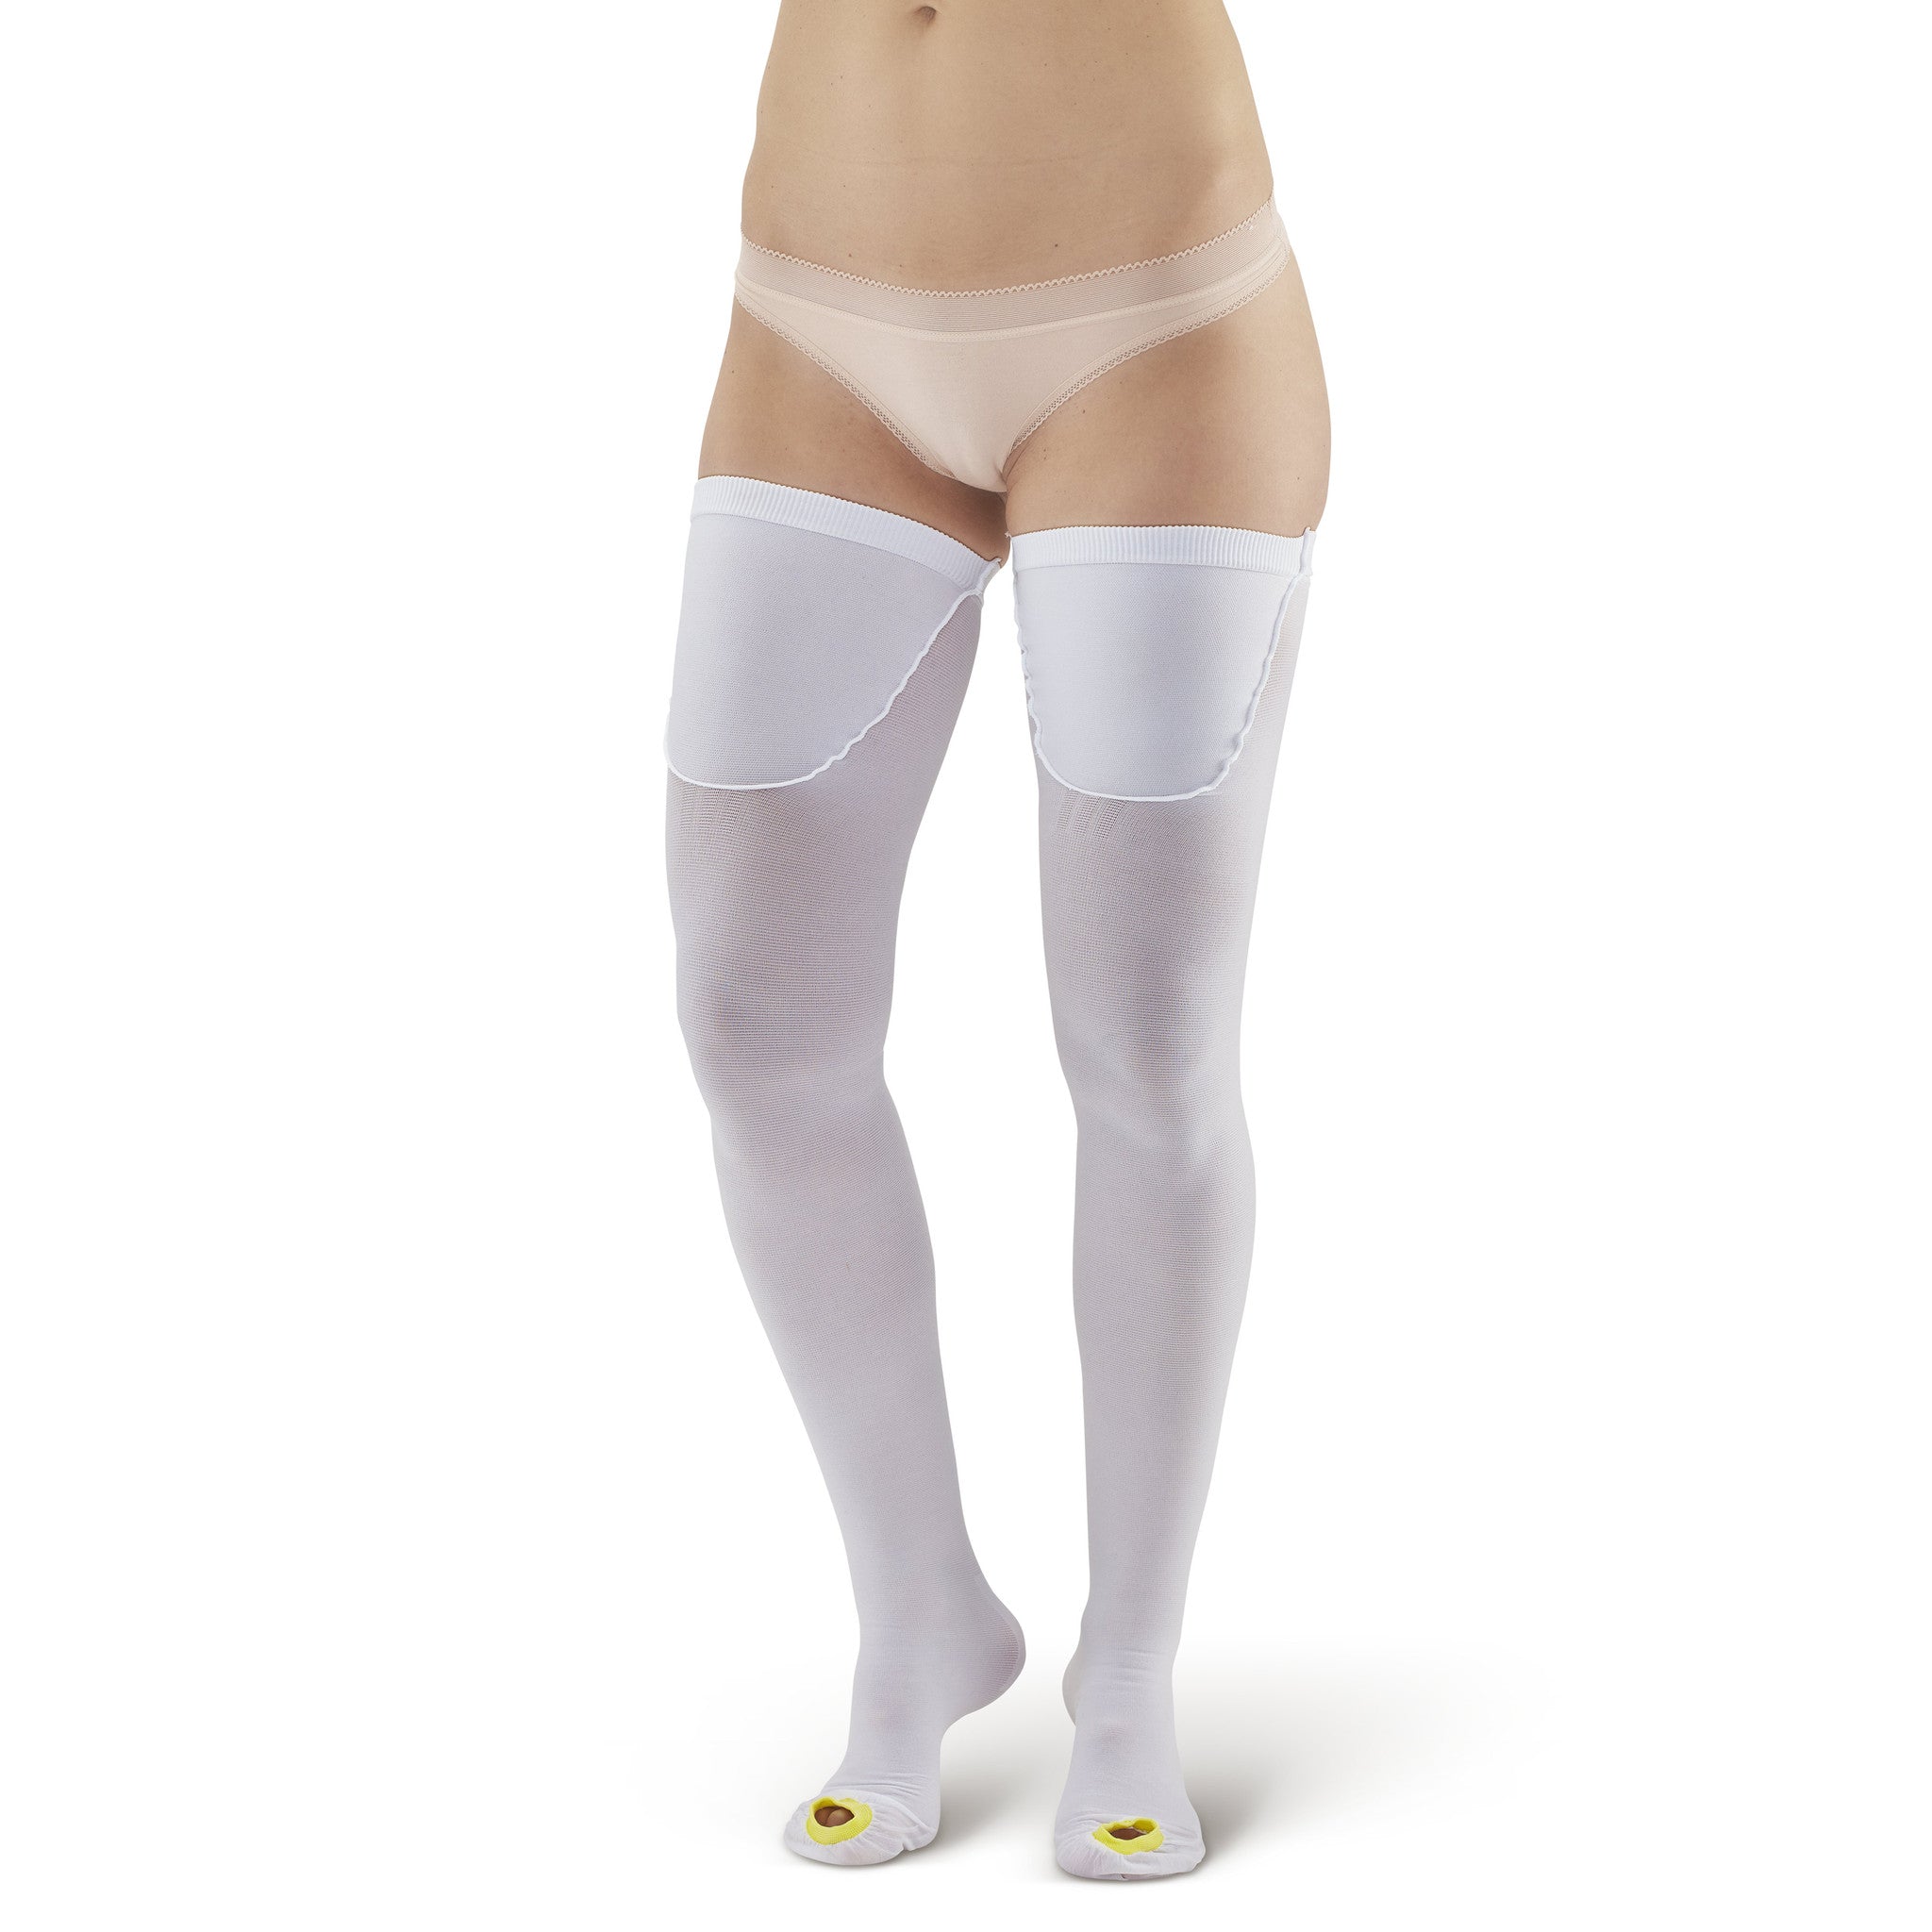 Buy Here - Secure Ted Stockings/ Compression Stockings - Allschoolabs Online